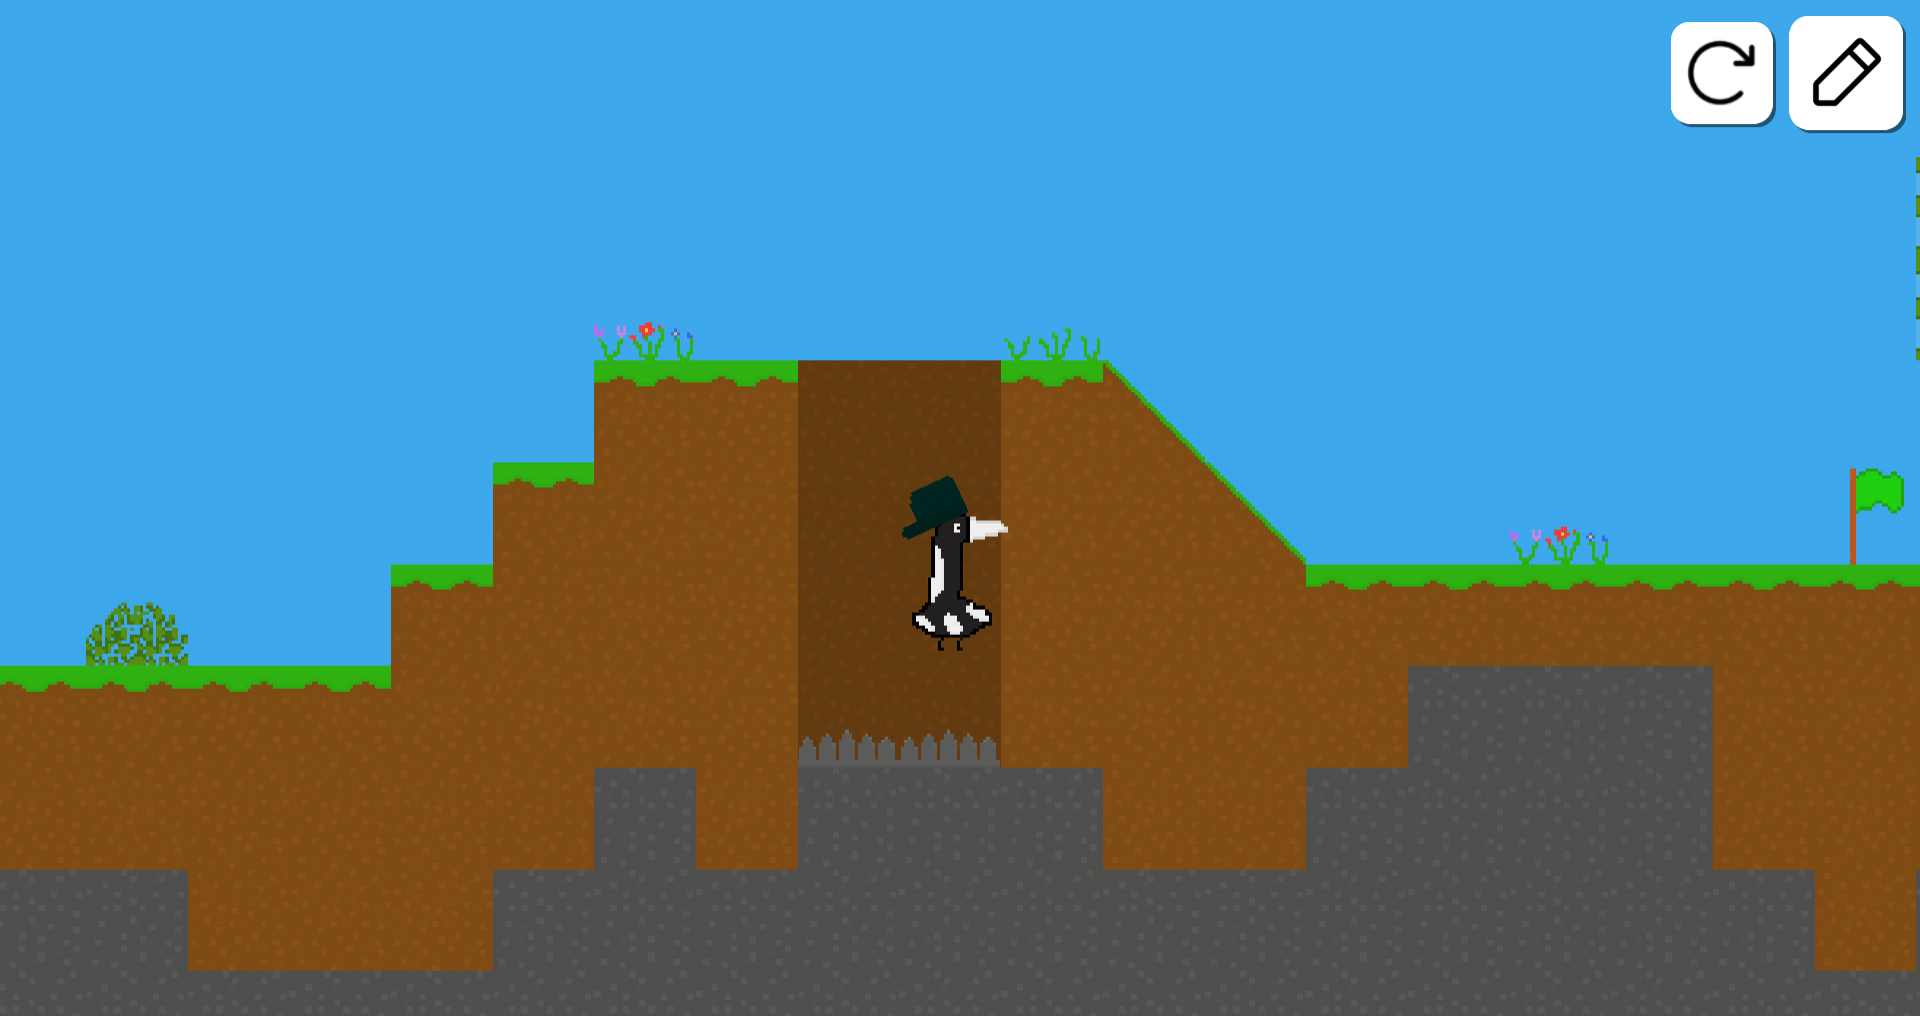 Playing a grassy level where the player fell onto spikes from missing a jump.